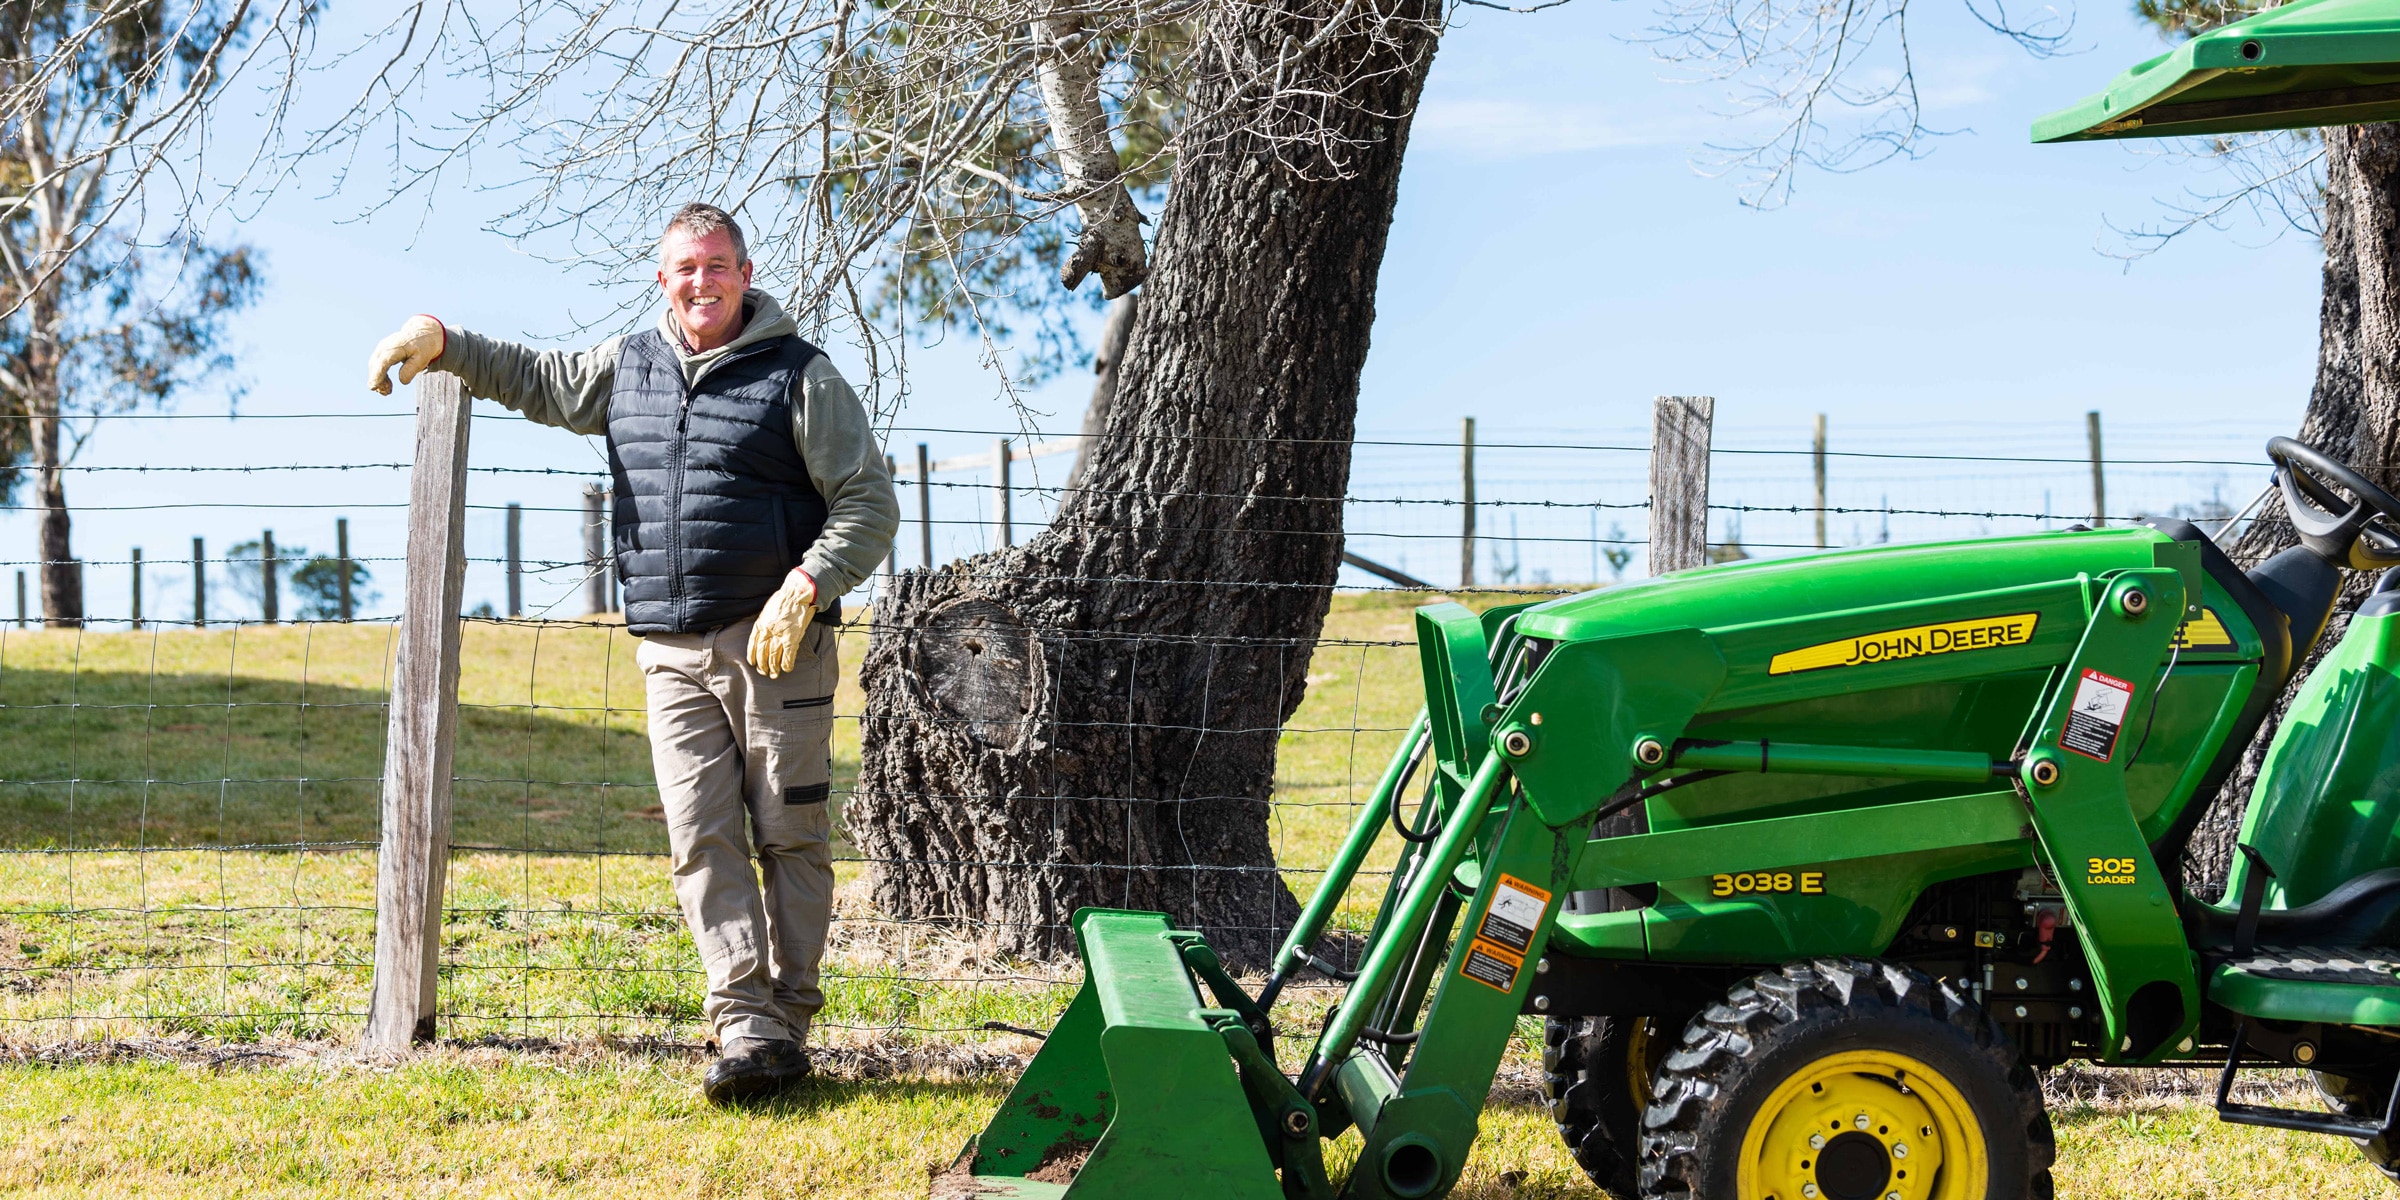 Tim Palmer leaning against a fence next to his John Deere Tractor